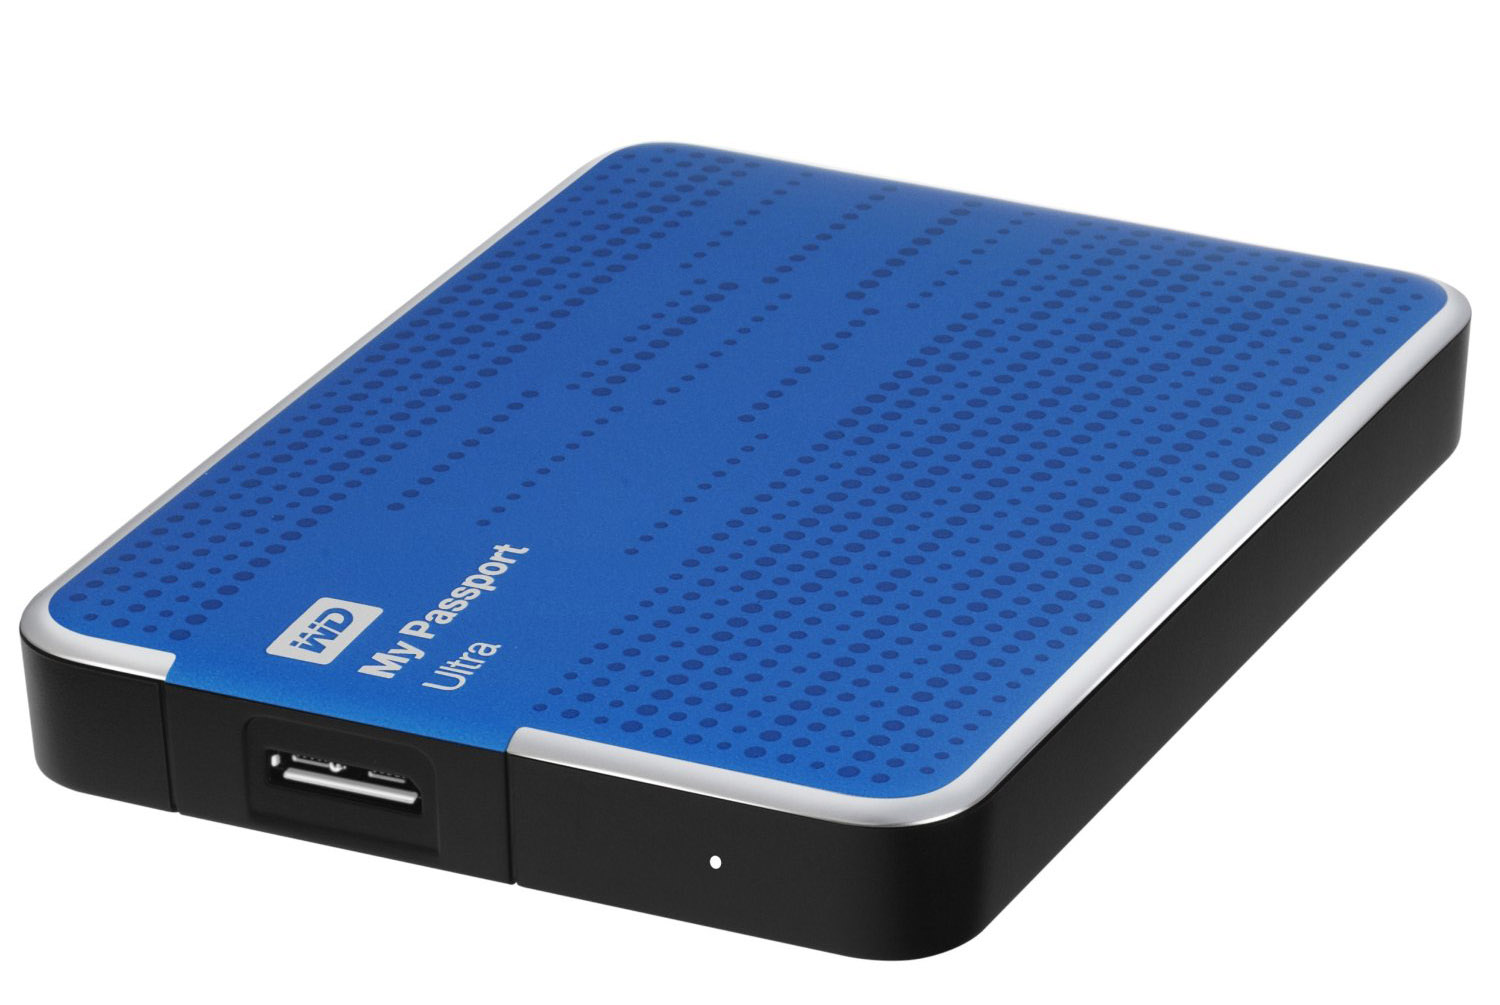 portable hard drive used for mac can download to windows?